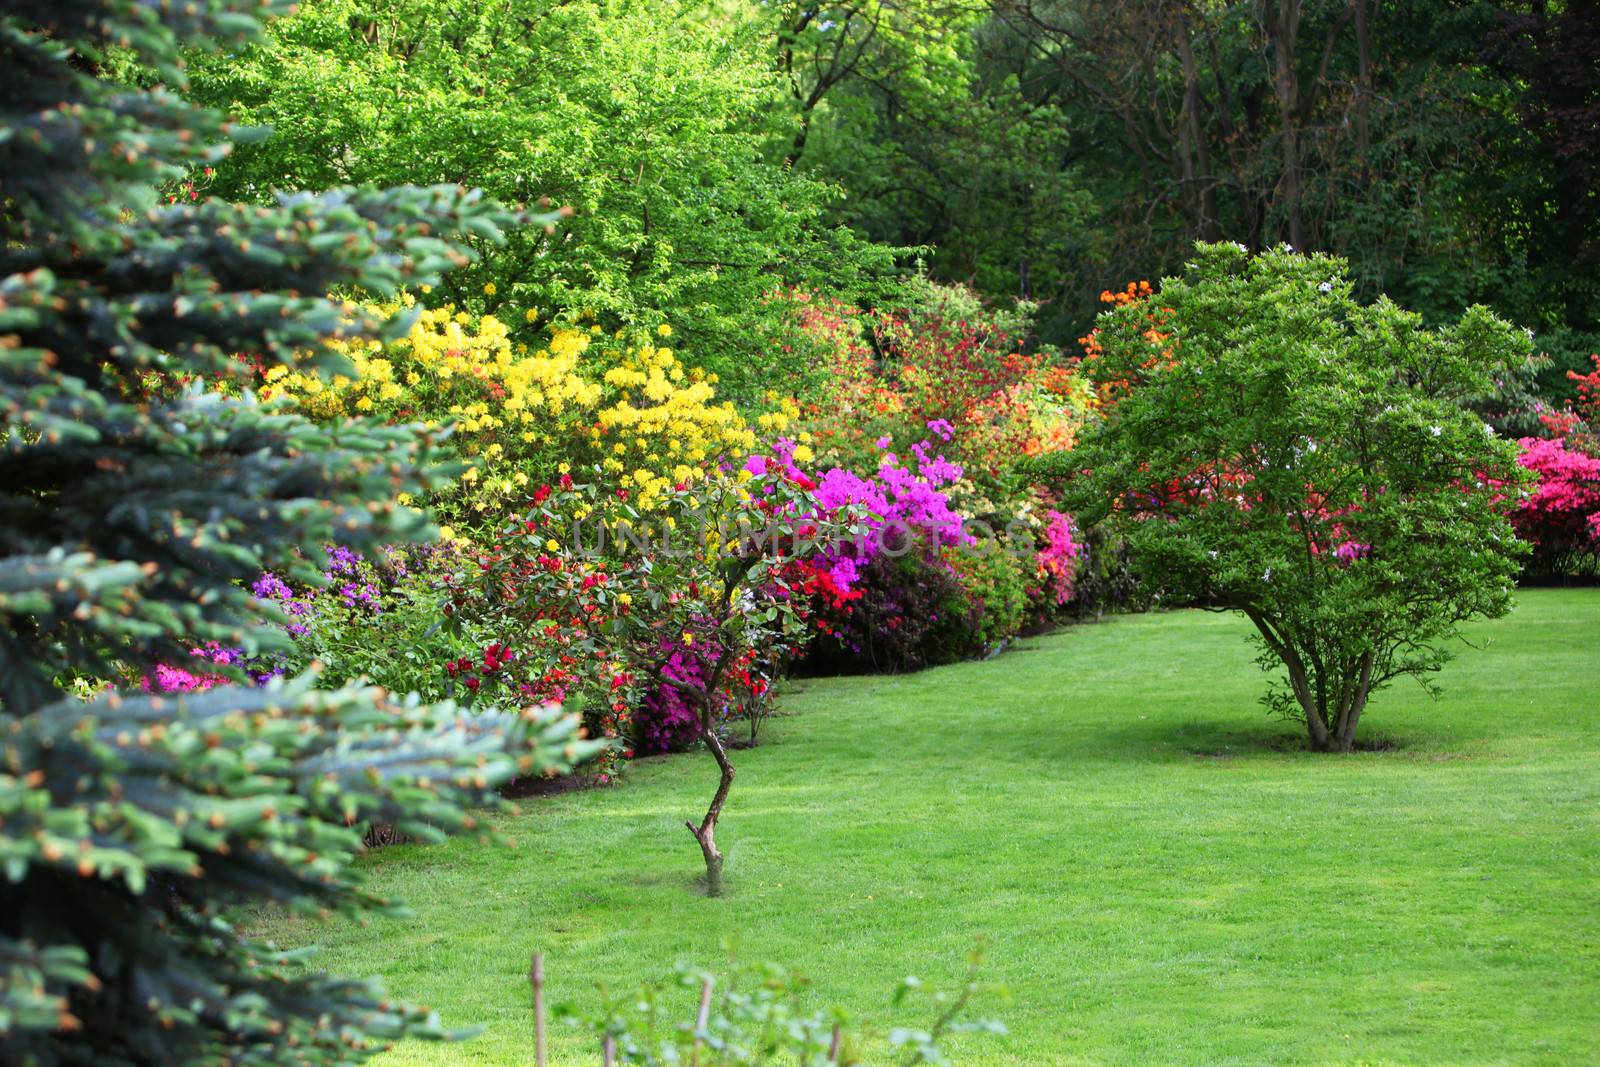 Colourful flowering shrubs in a spring garden in shades of yellow, pink and red bordering a neatly manicured lush green lawn with a backdrop of dense trees